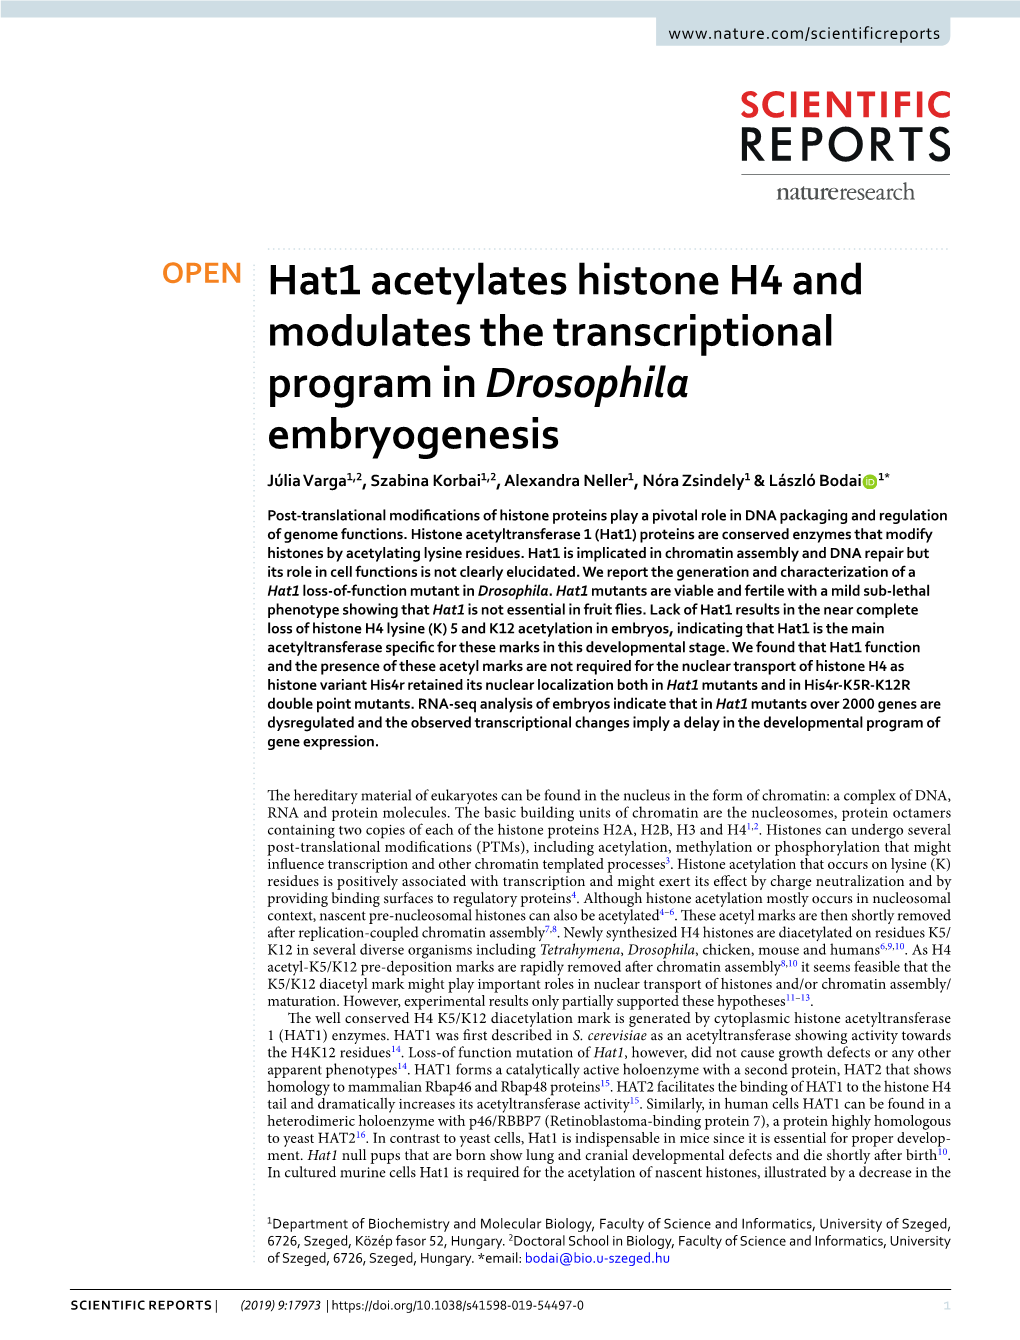 Hat1 Acetylates Histone H4 and Modulates the Transcriptional